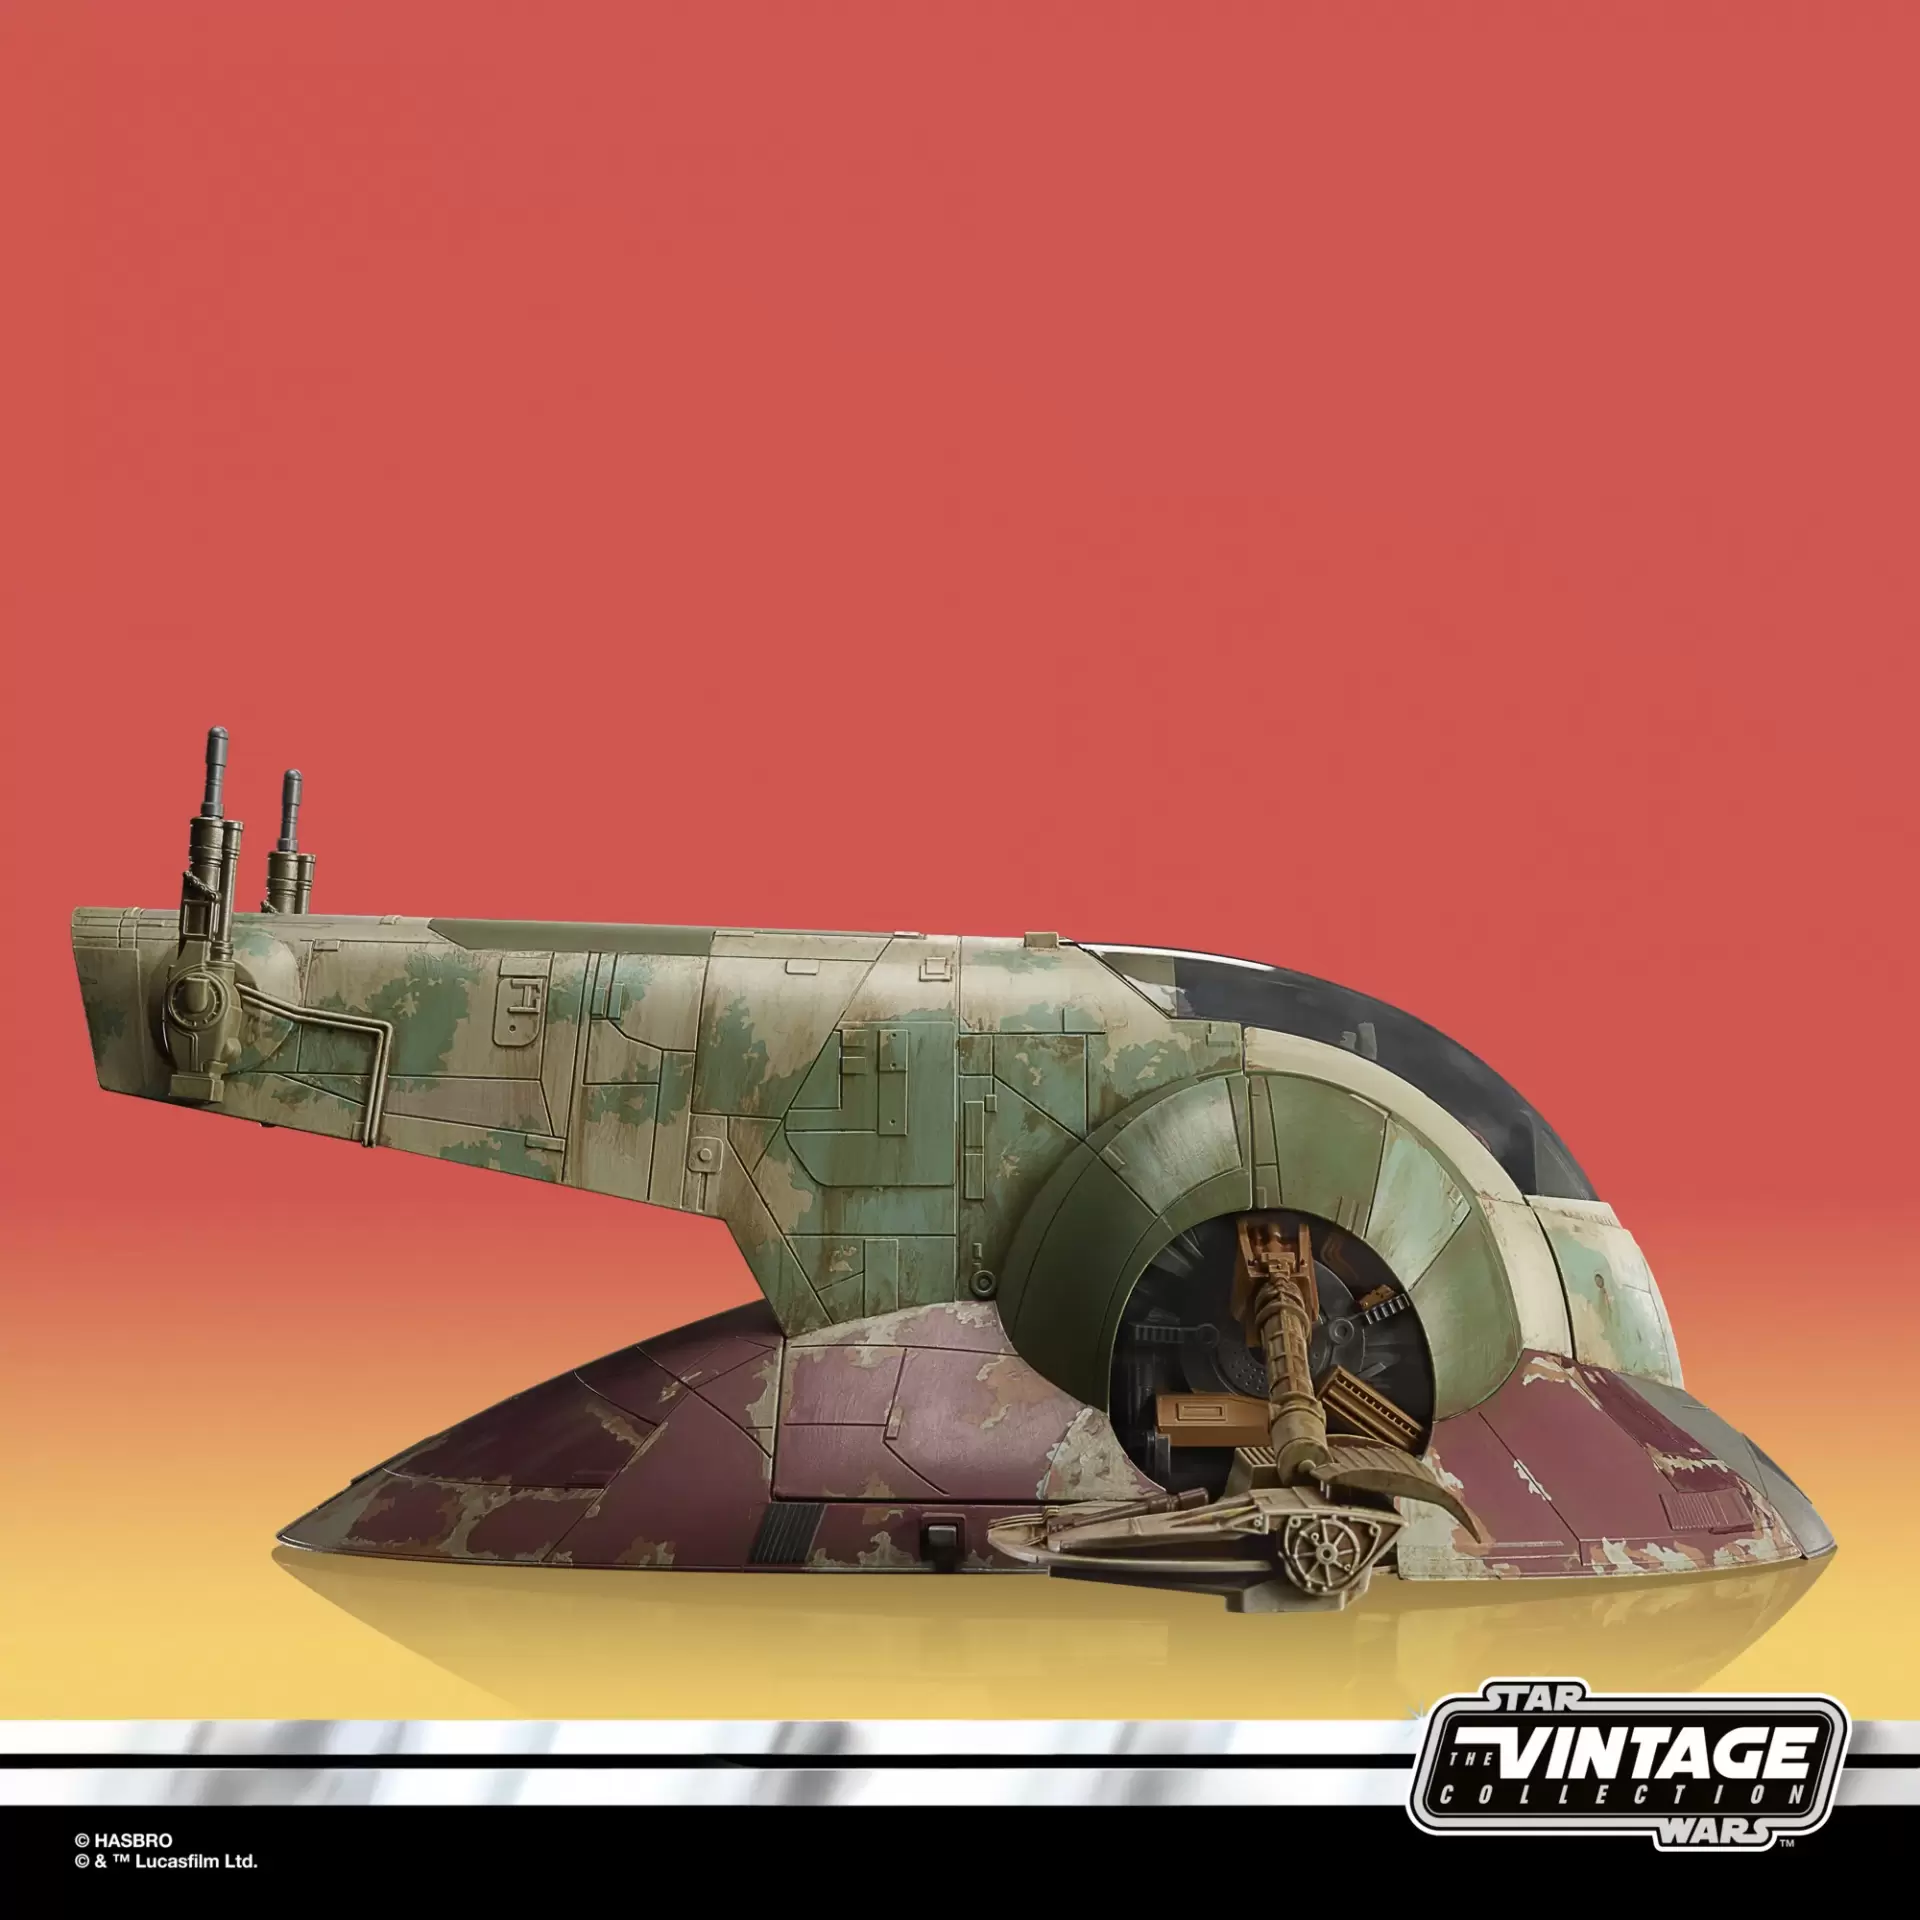 Star wars the vintage collection boba fett s starship jawascave 6